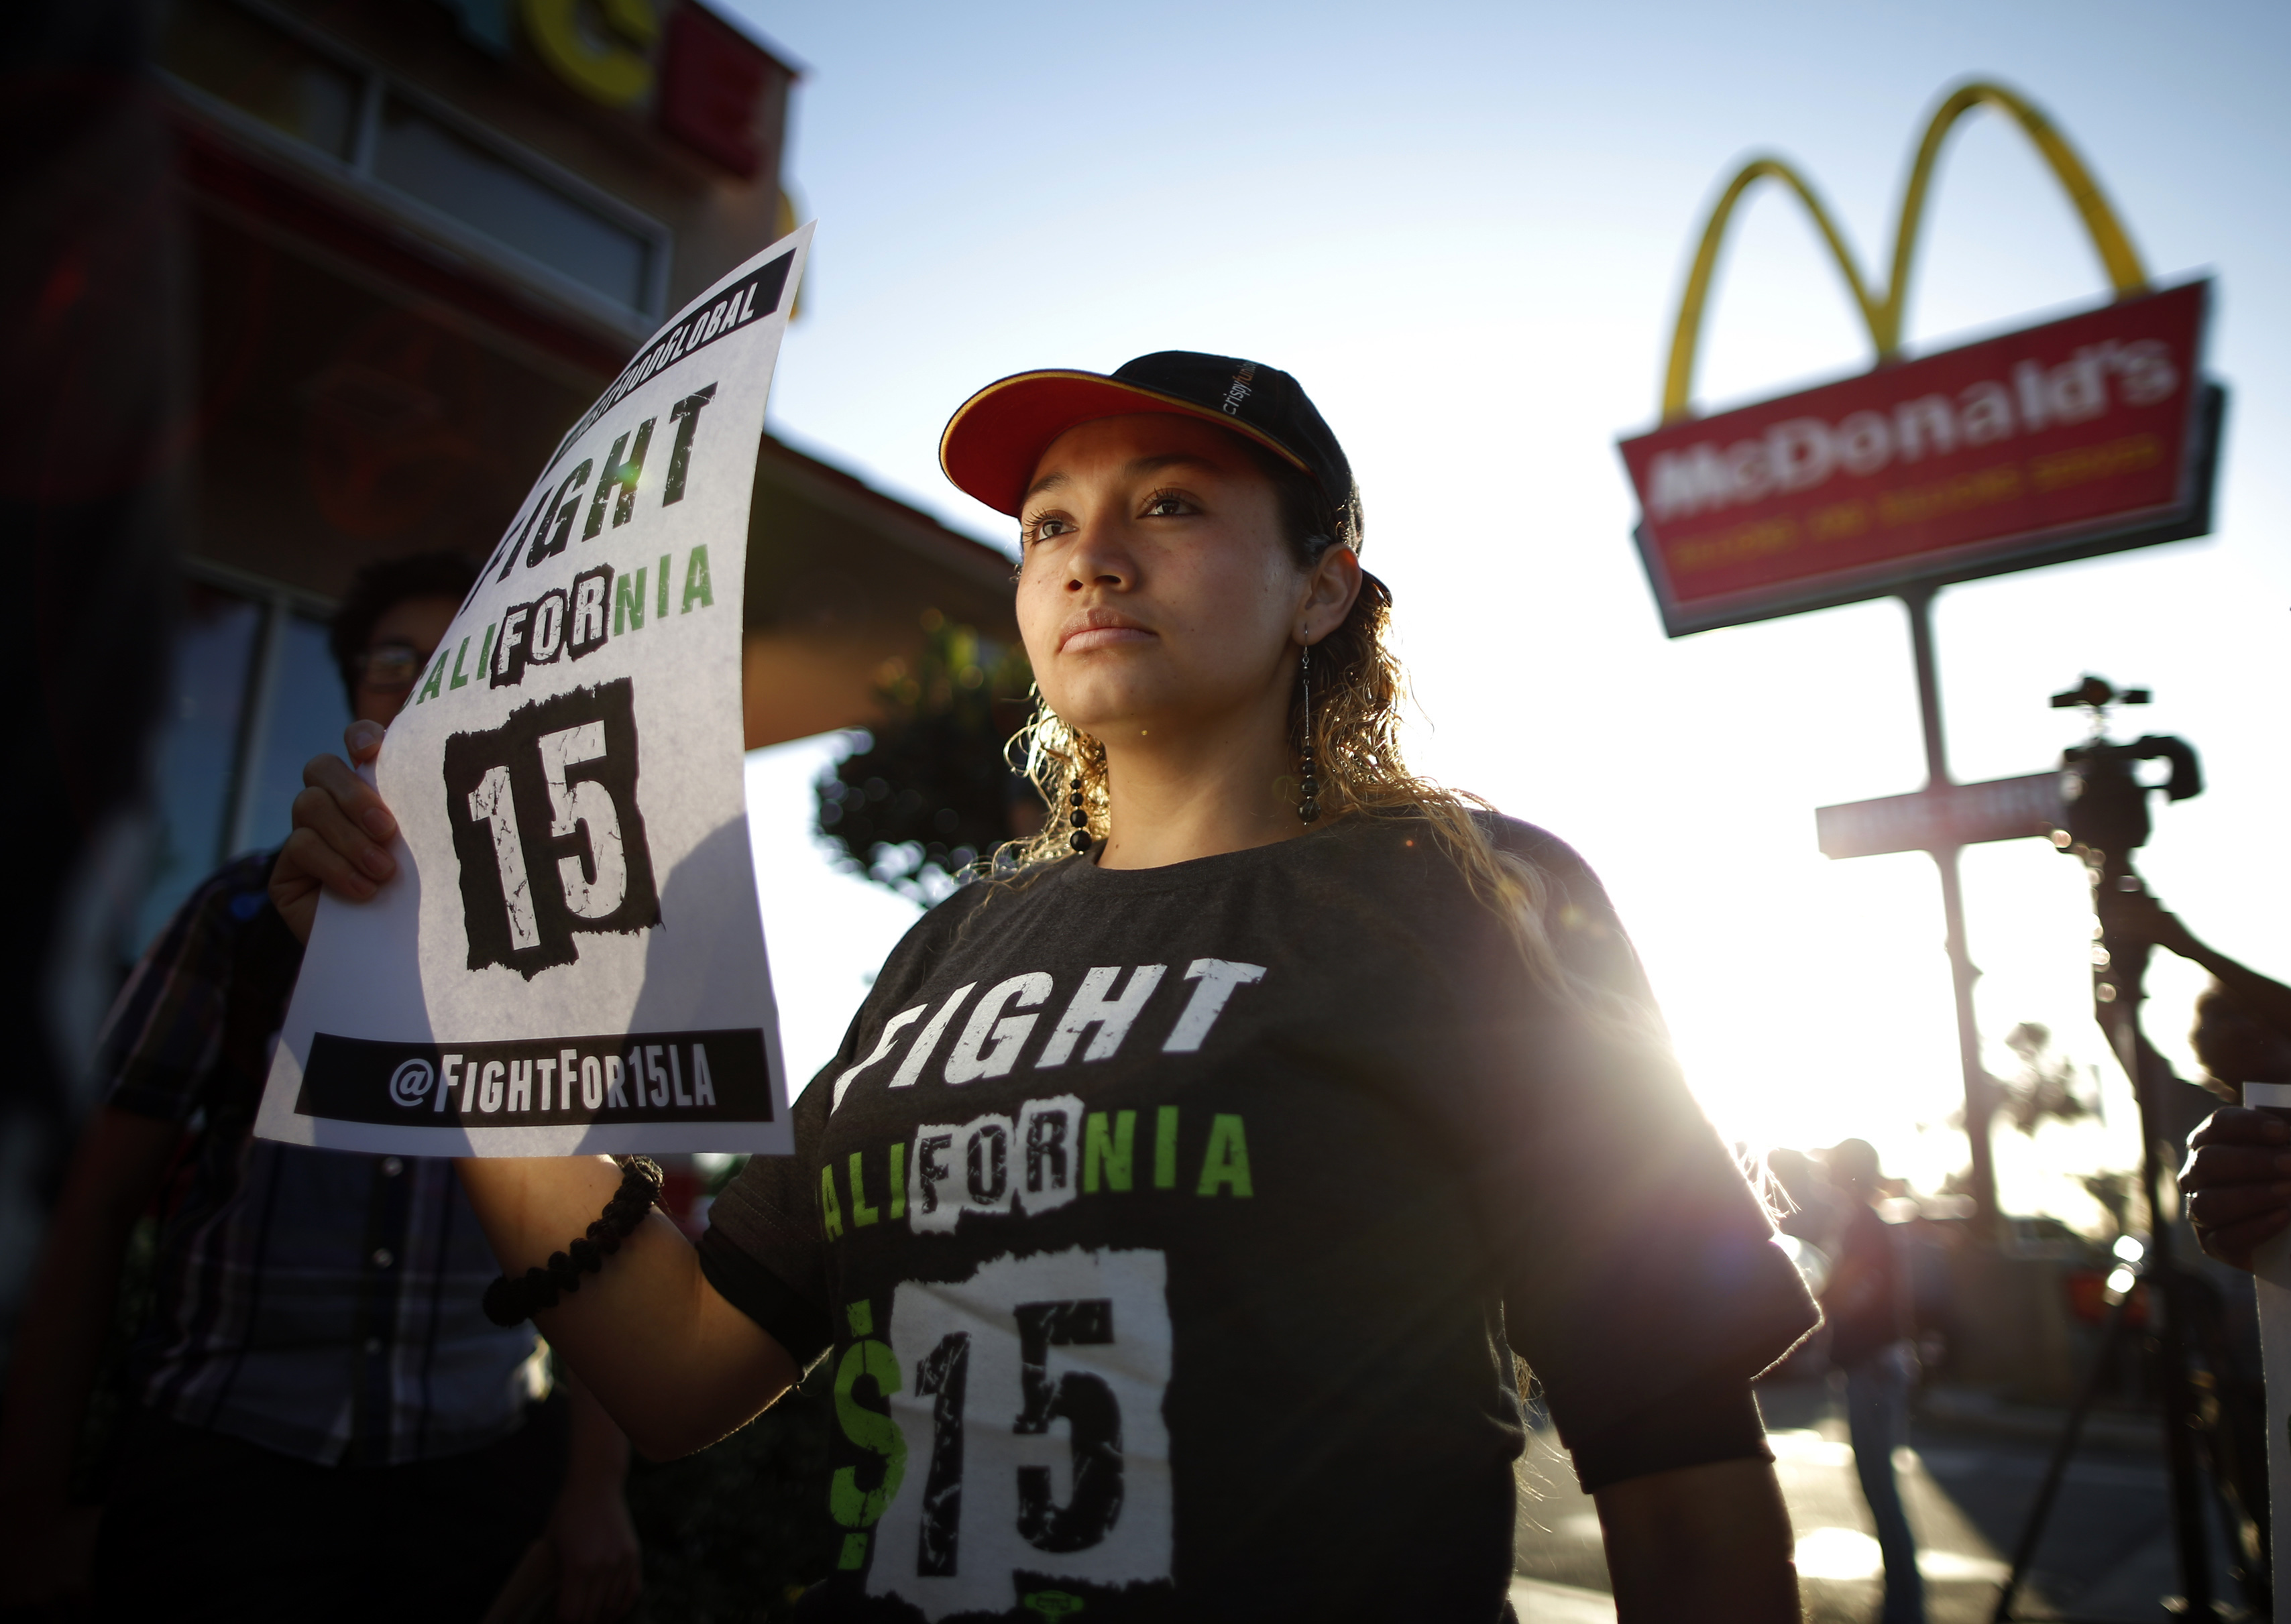 Demonstrators take part in a protest to demand higher wages for fast-food workers outside McDonald's in Los Angeles on May 15, 2014. (Lucy Nicholson—Reuters)